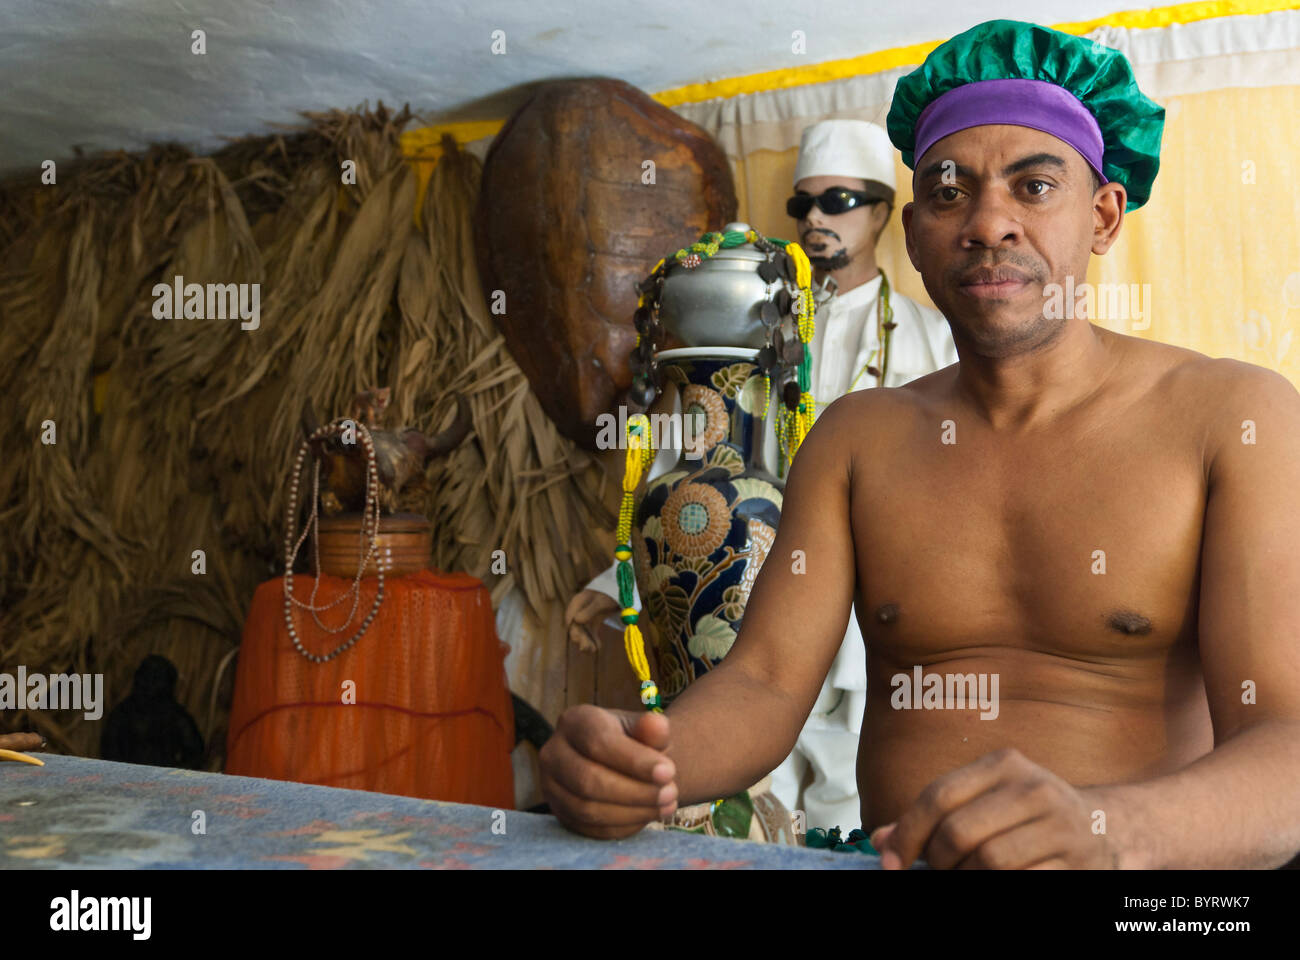 Babalao priest in his house with things needed for his rituals, La Habana, Cuba, Caribbean. Stock Photo